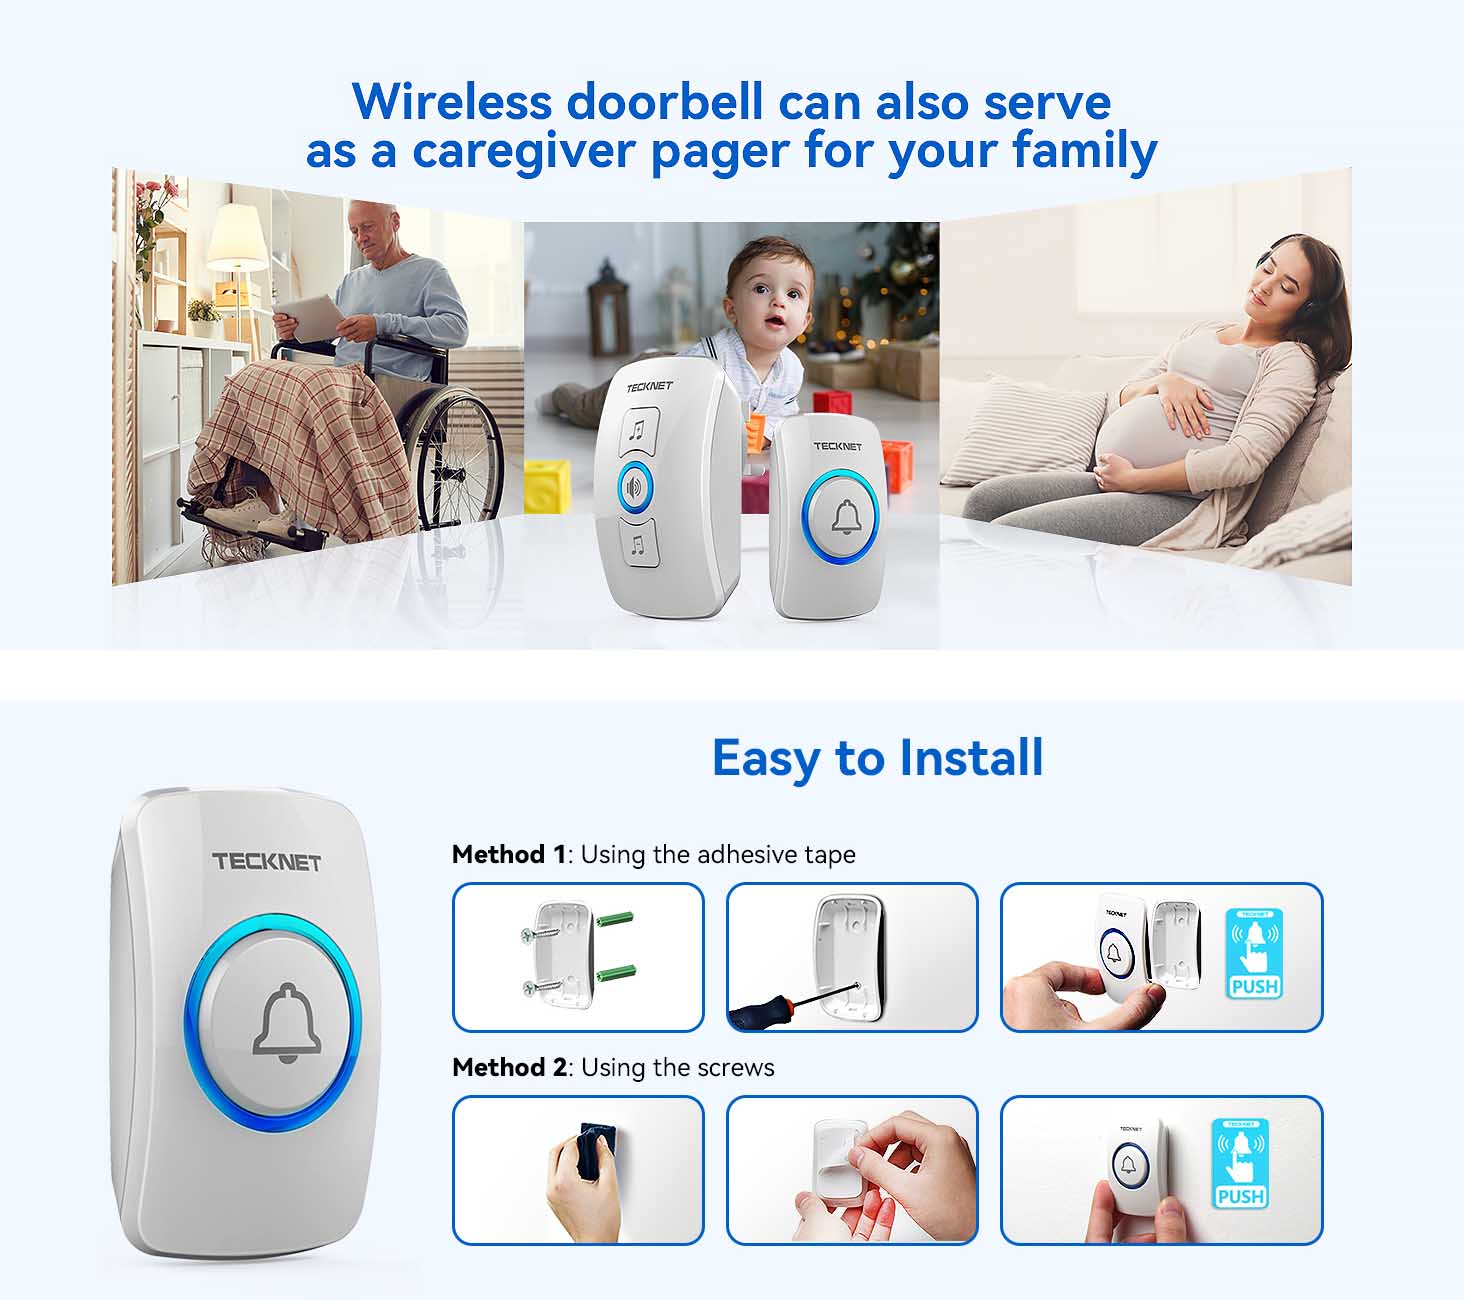 Waterproof Wall Plug-in Door Bell Cordless Chime Kit, easy to install